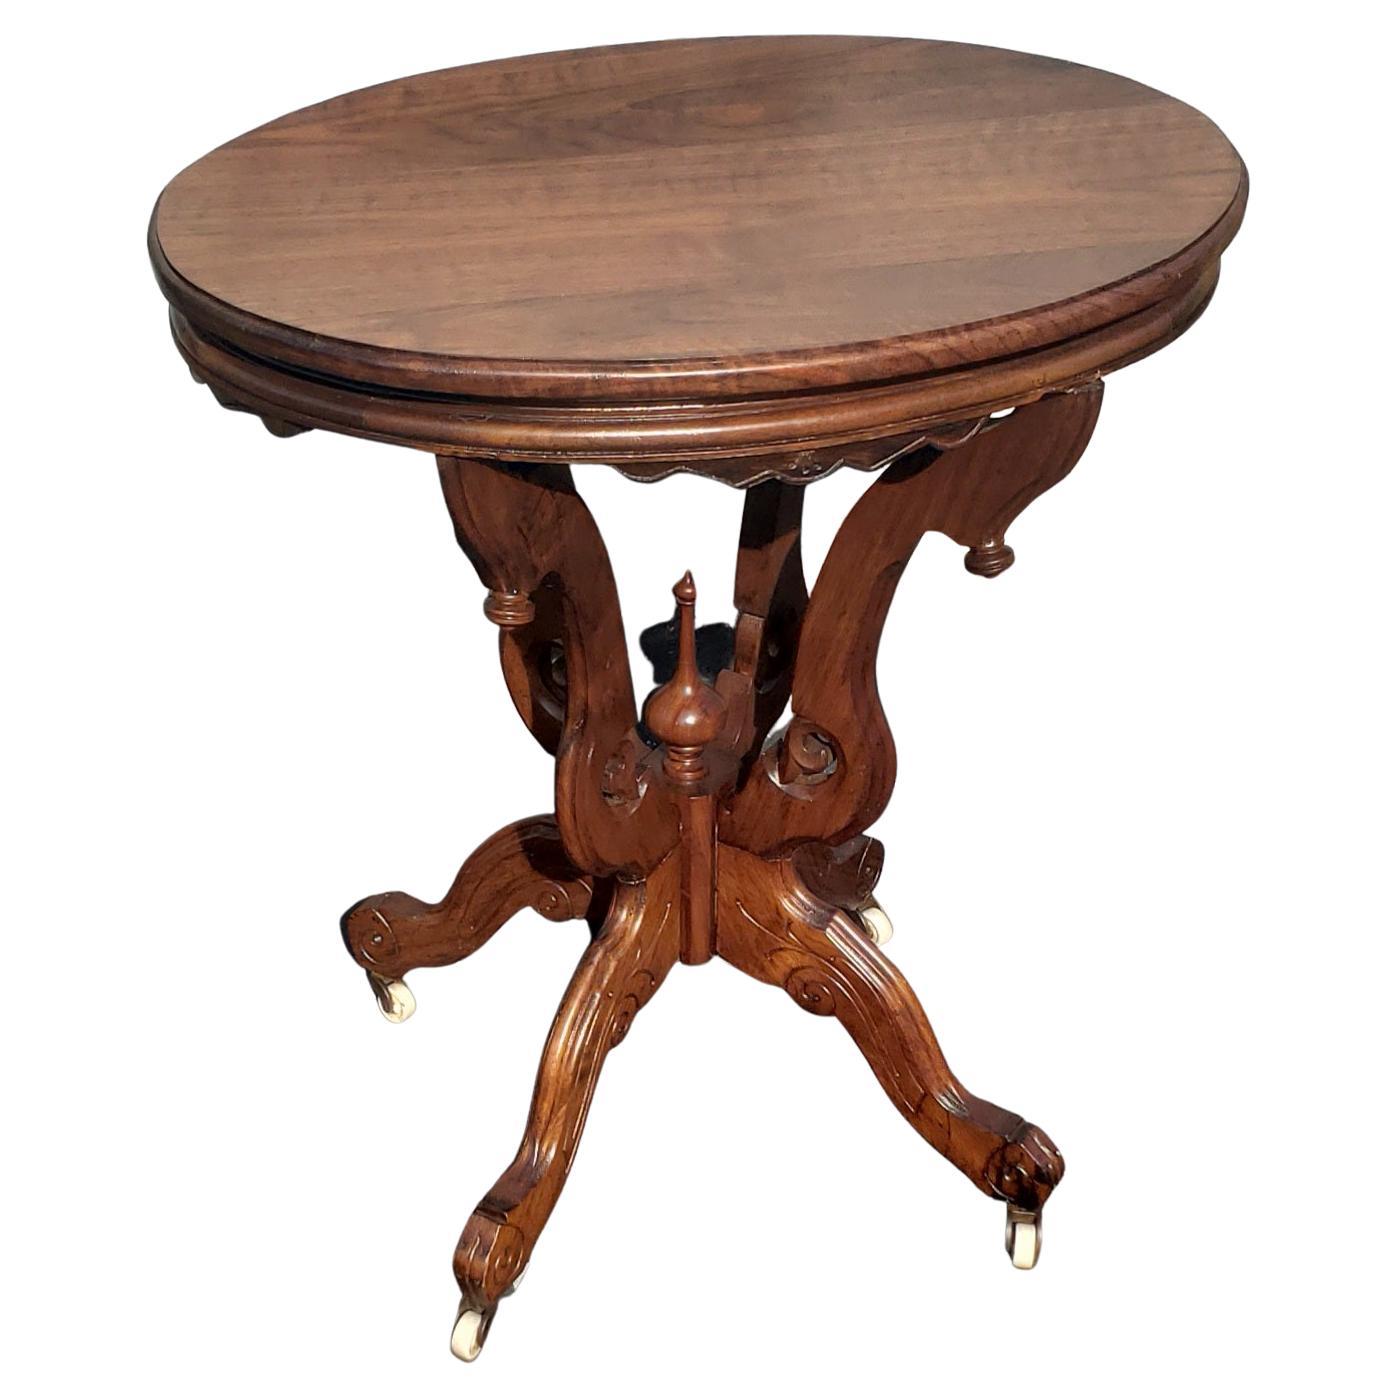 Early 1900s solid walnut Victorian accent table, tea table on wheels.
Table has been refinished and is excellent vintage condition.
Measures 27' W x 19.75